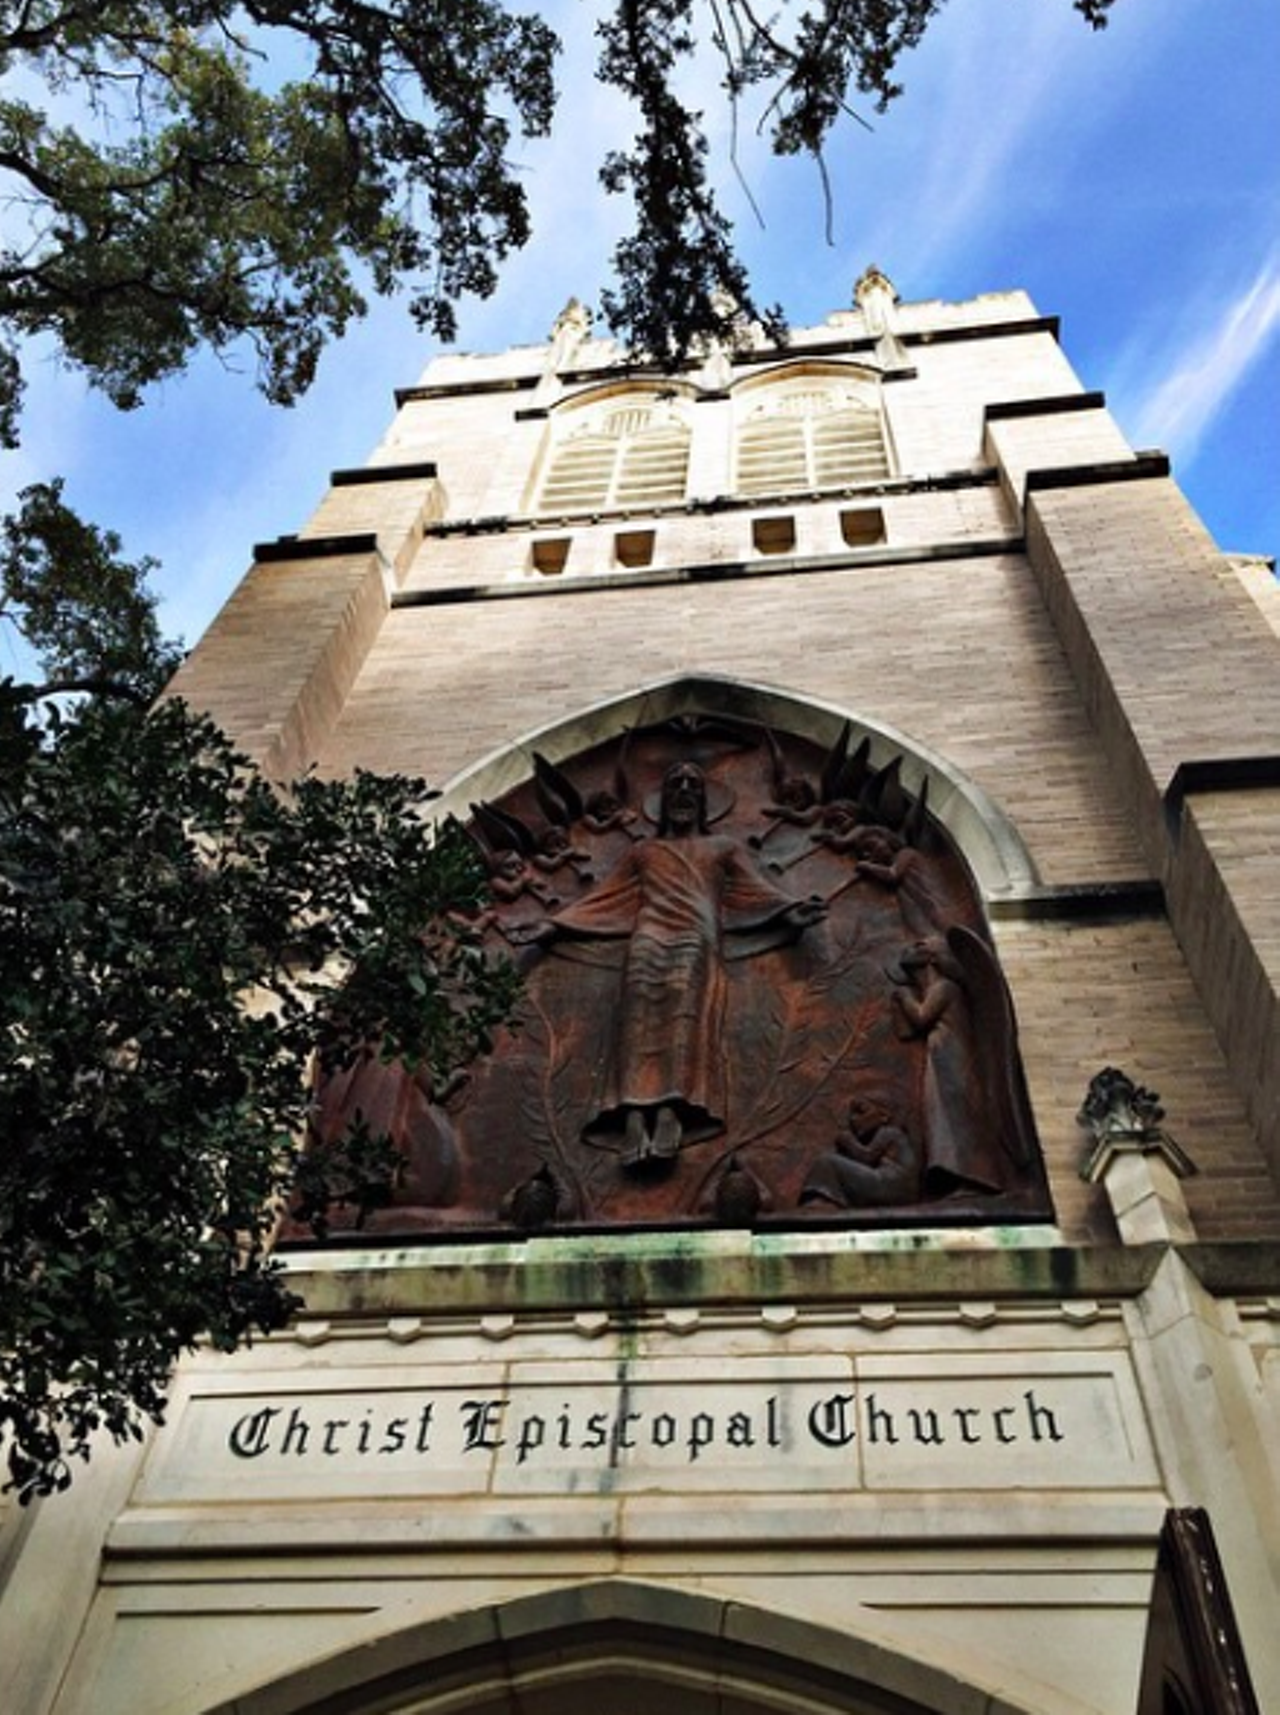 Christ Episcopal Church
510 Belknap Pl, cecsa.org
Found in the charming Monte Vista neighborhood is Christ Episcopal Church, regarded as peaceful as it is beautiful. It was founded in 1907, so the church as welcomed plenty of visitors since its founding.
Photo via Instagram / joannaraeb